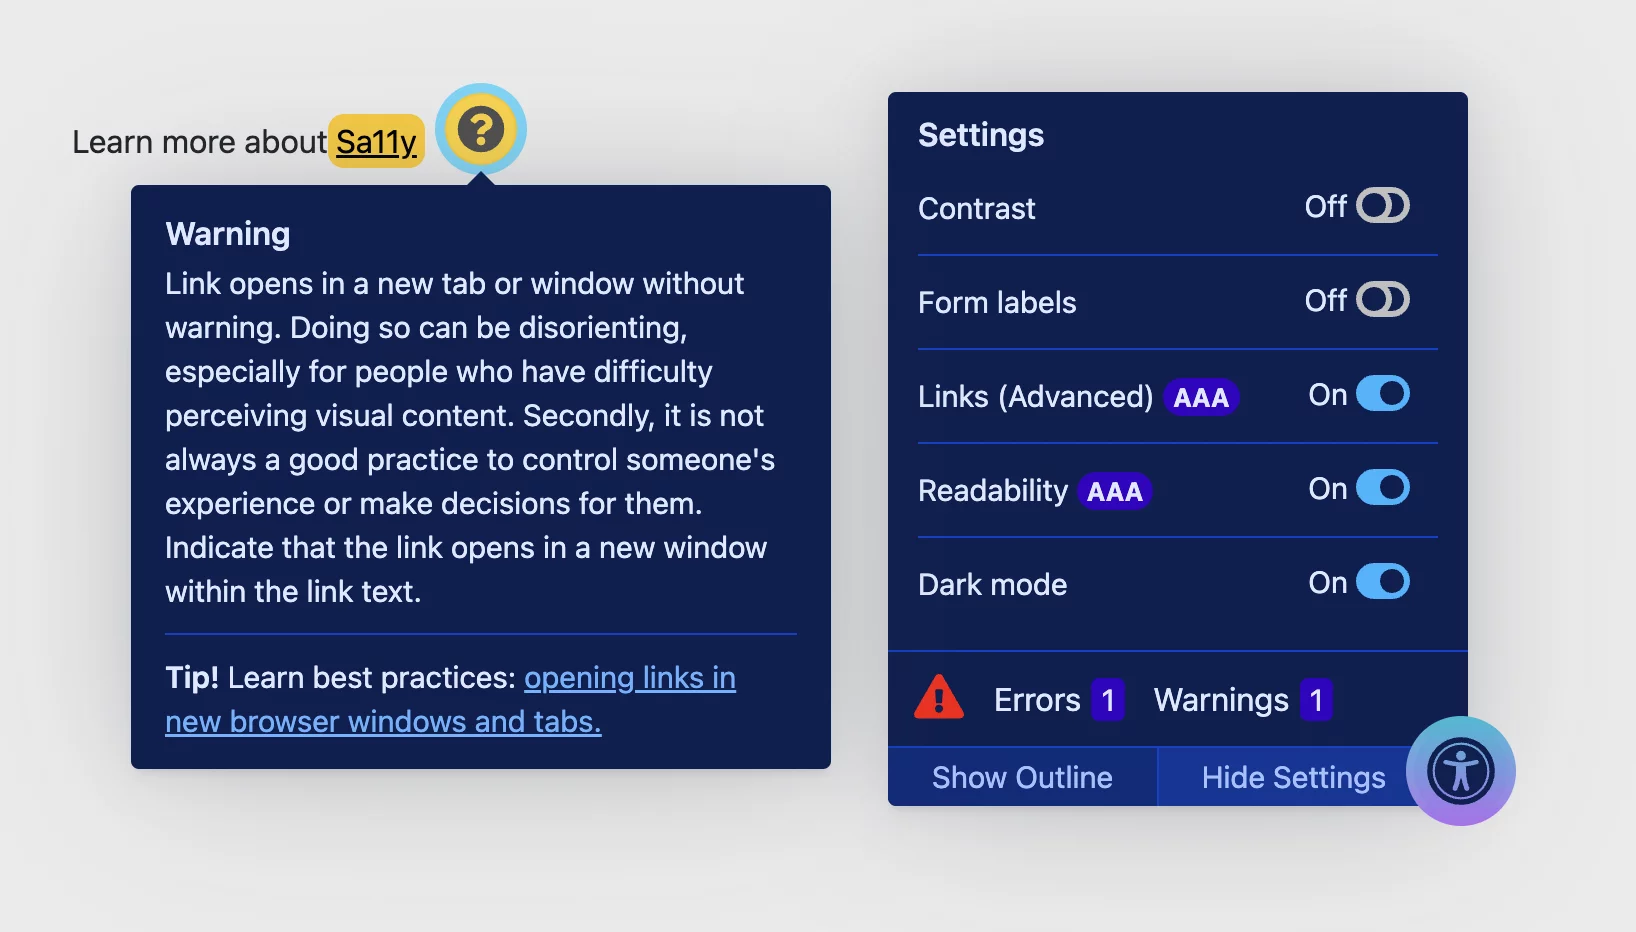 Screenshot of settings panel in dark mode showing toggles for contrast, form labels, links (advanced), readability and dark mode. There is also a tooltip warning about links that open in a new tab without warning.